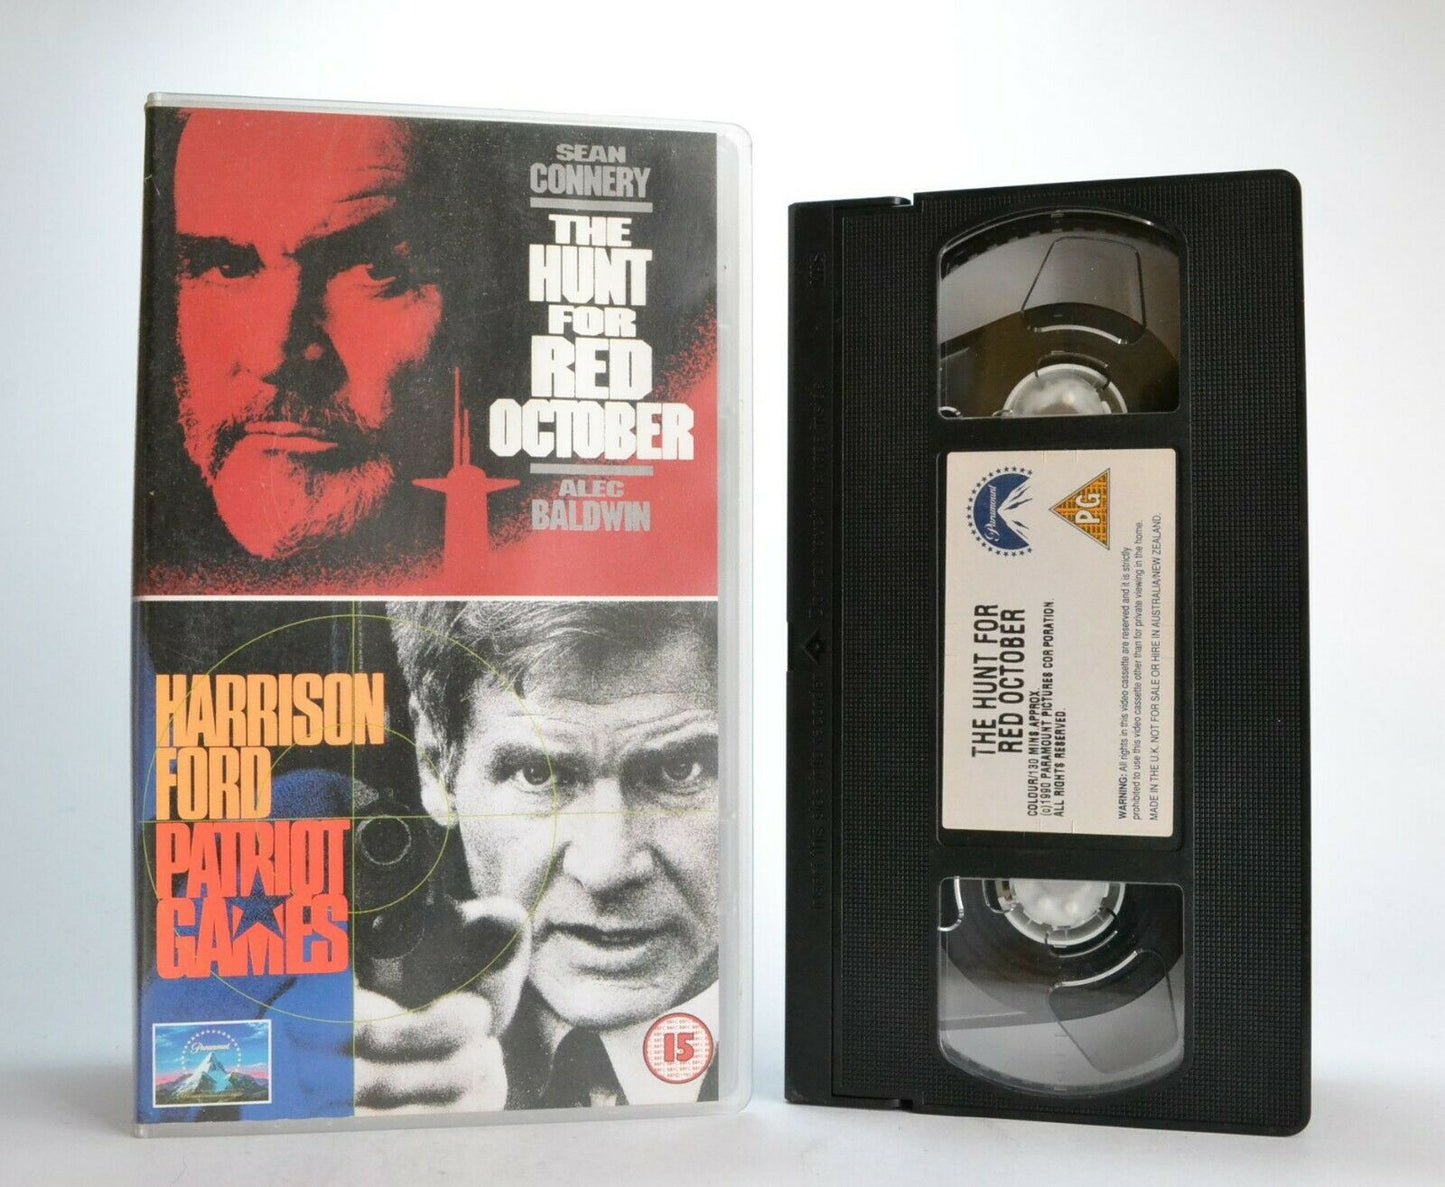 The Hunt For Red October/Patriot Games: 2 On 1 Movies - S.Connery/H.Ford - VHS-